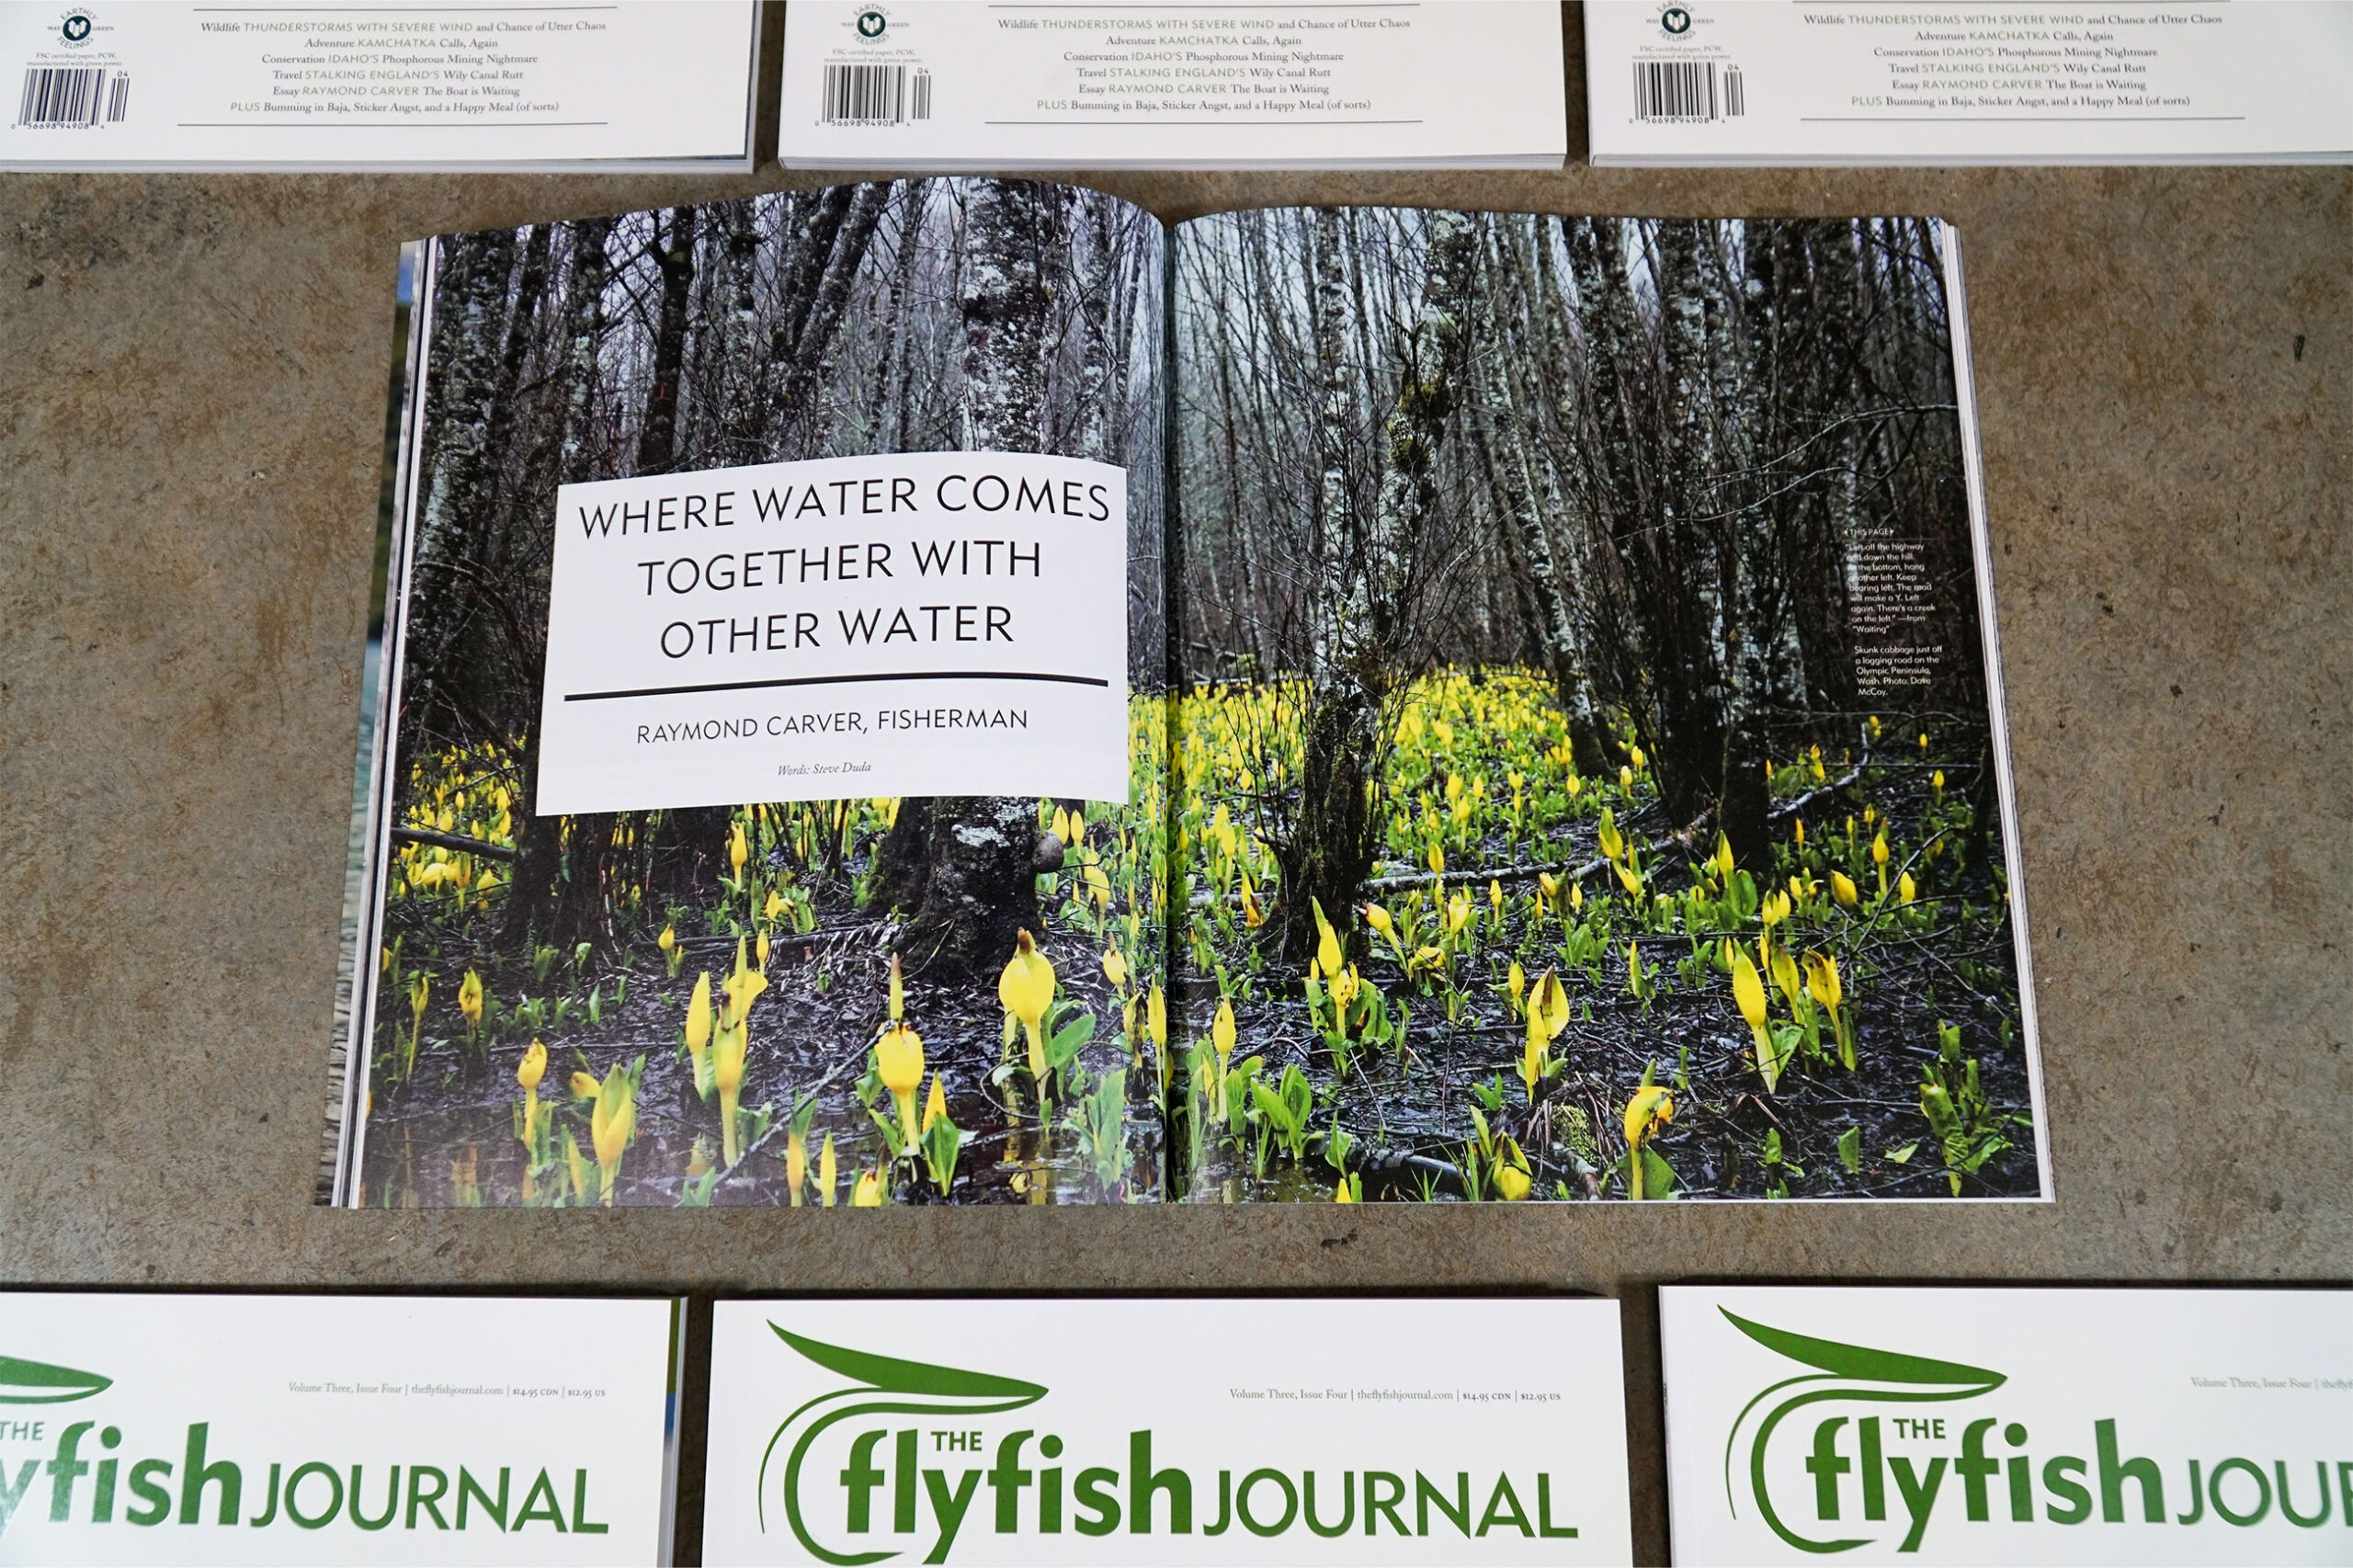 The Flyfish Journal Volume 3 Issue 4 Feature Where Water Comes Together with Other Water